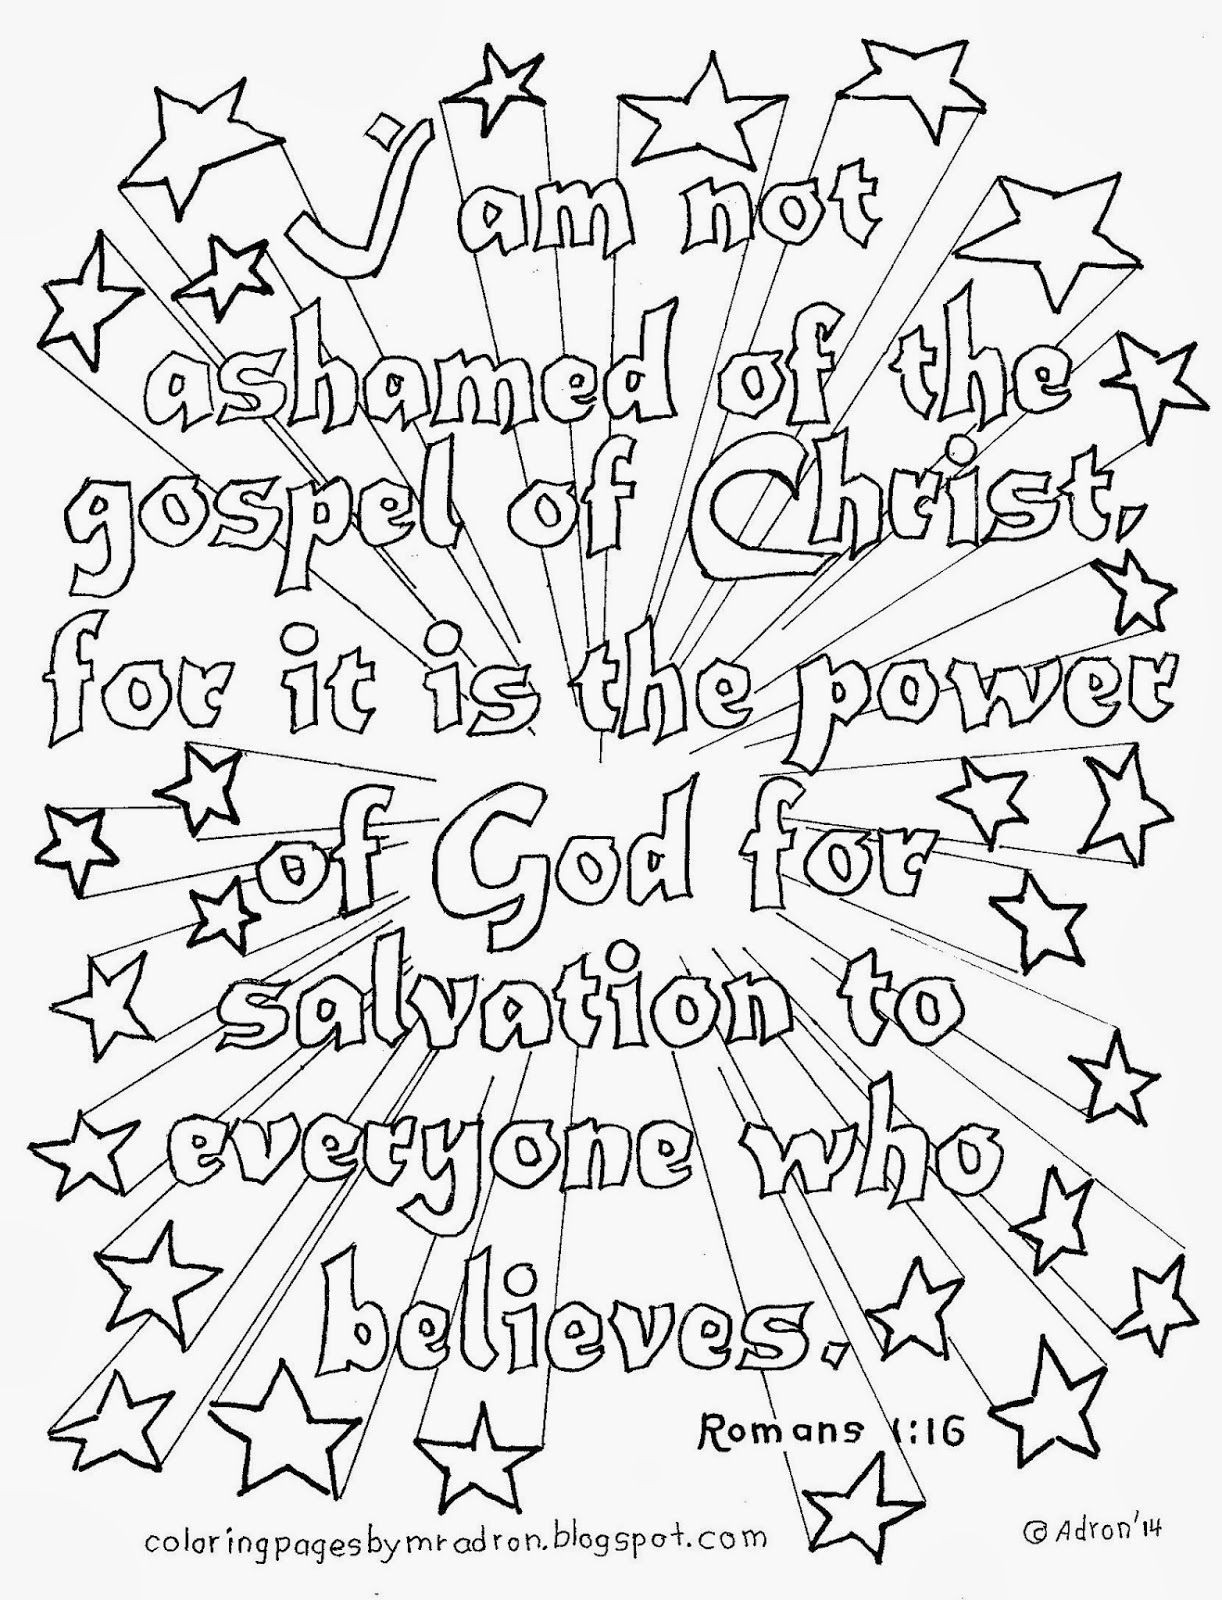 Bible Verse Coloring Pages For Kids
 Pin by Adron Dozat on Coloring Pages for Kid